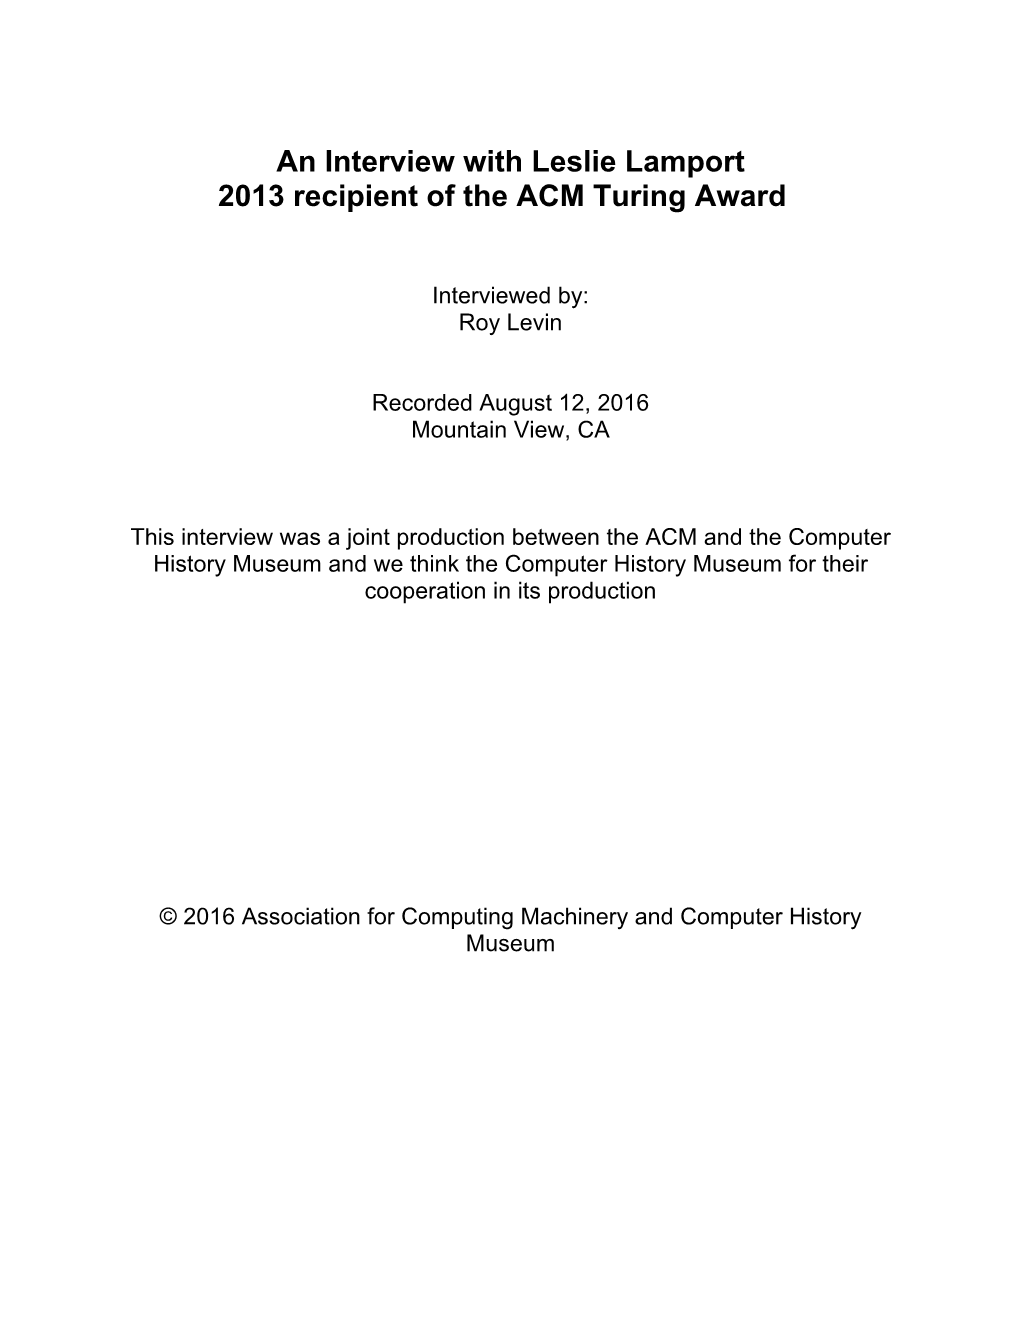 An Interview with Leslie Lamport 2013 Recipient of the ACM Turing Award